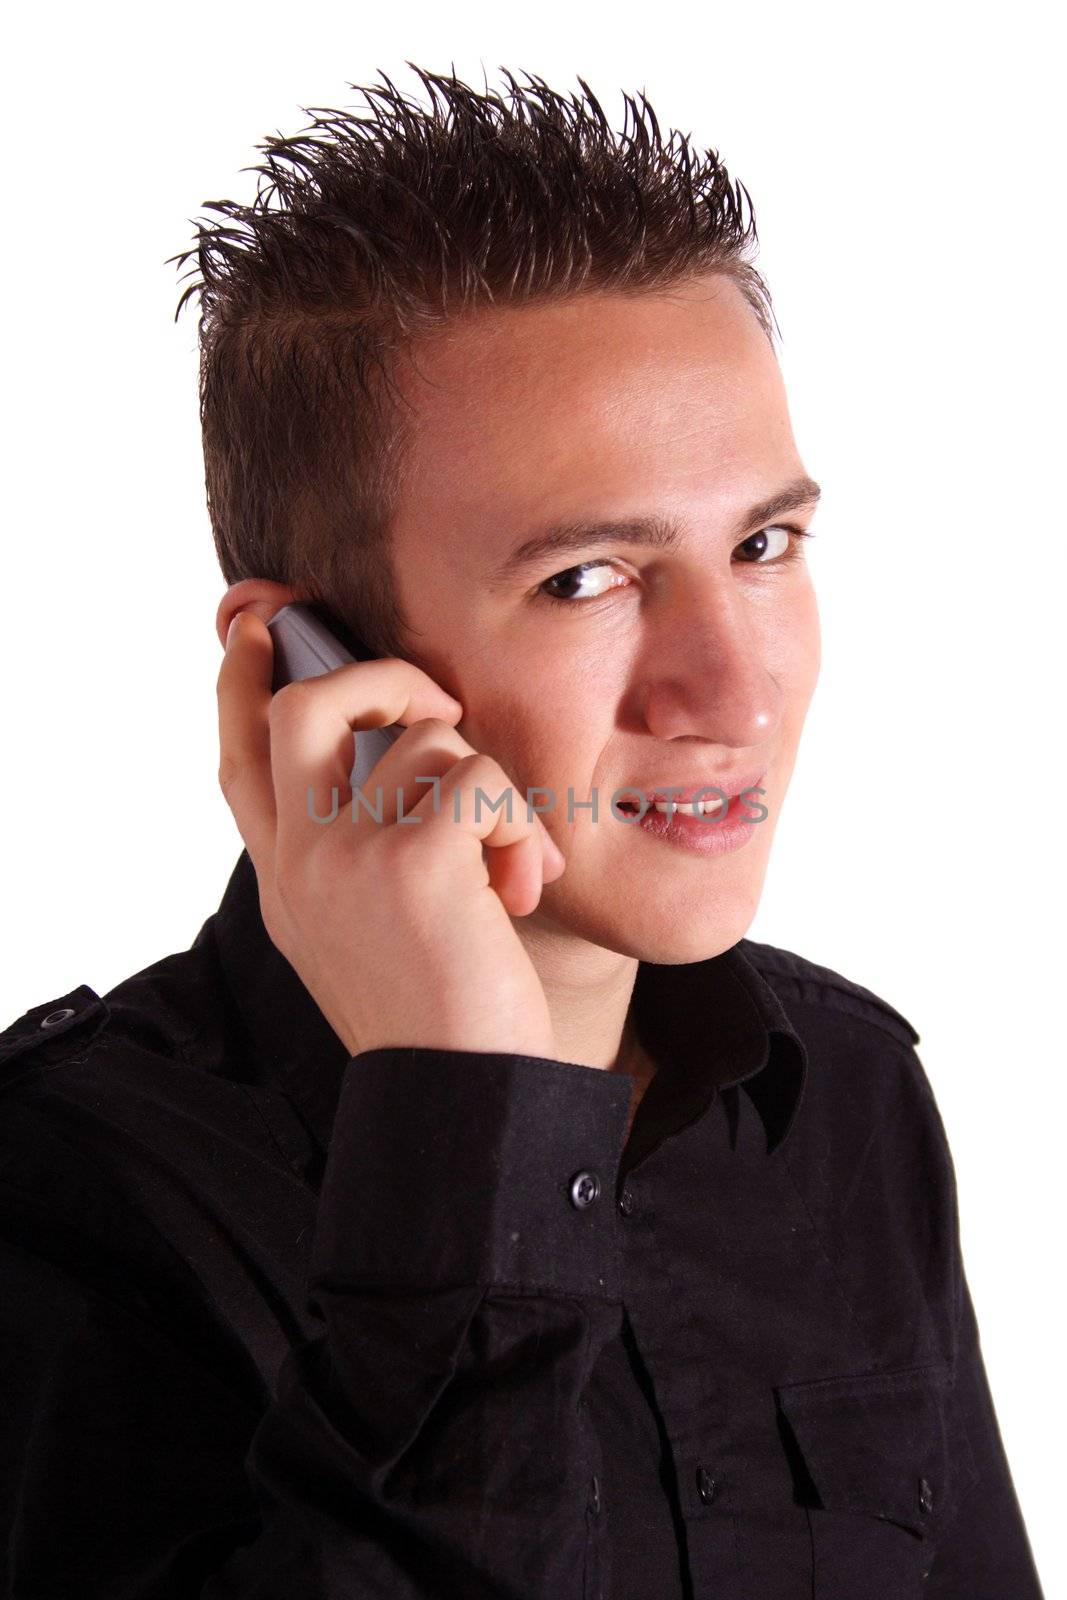 A young handsome man gives someone a call. All isolated on white background.